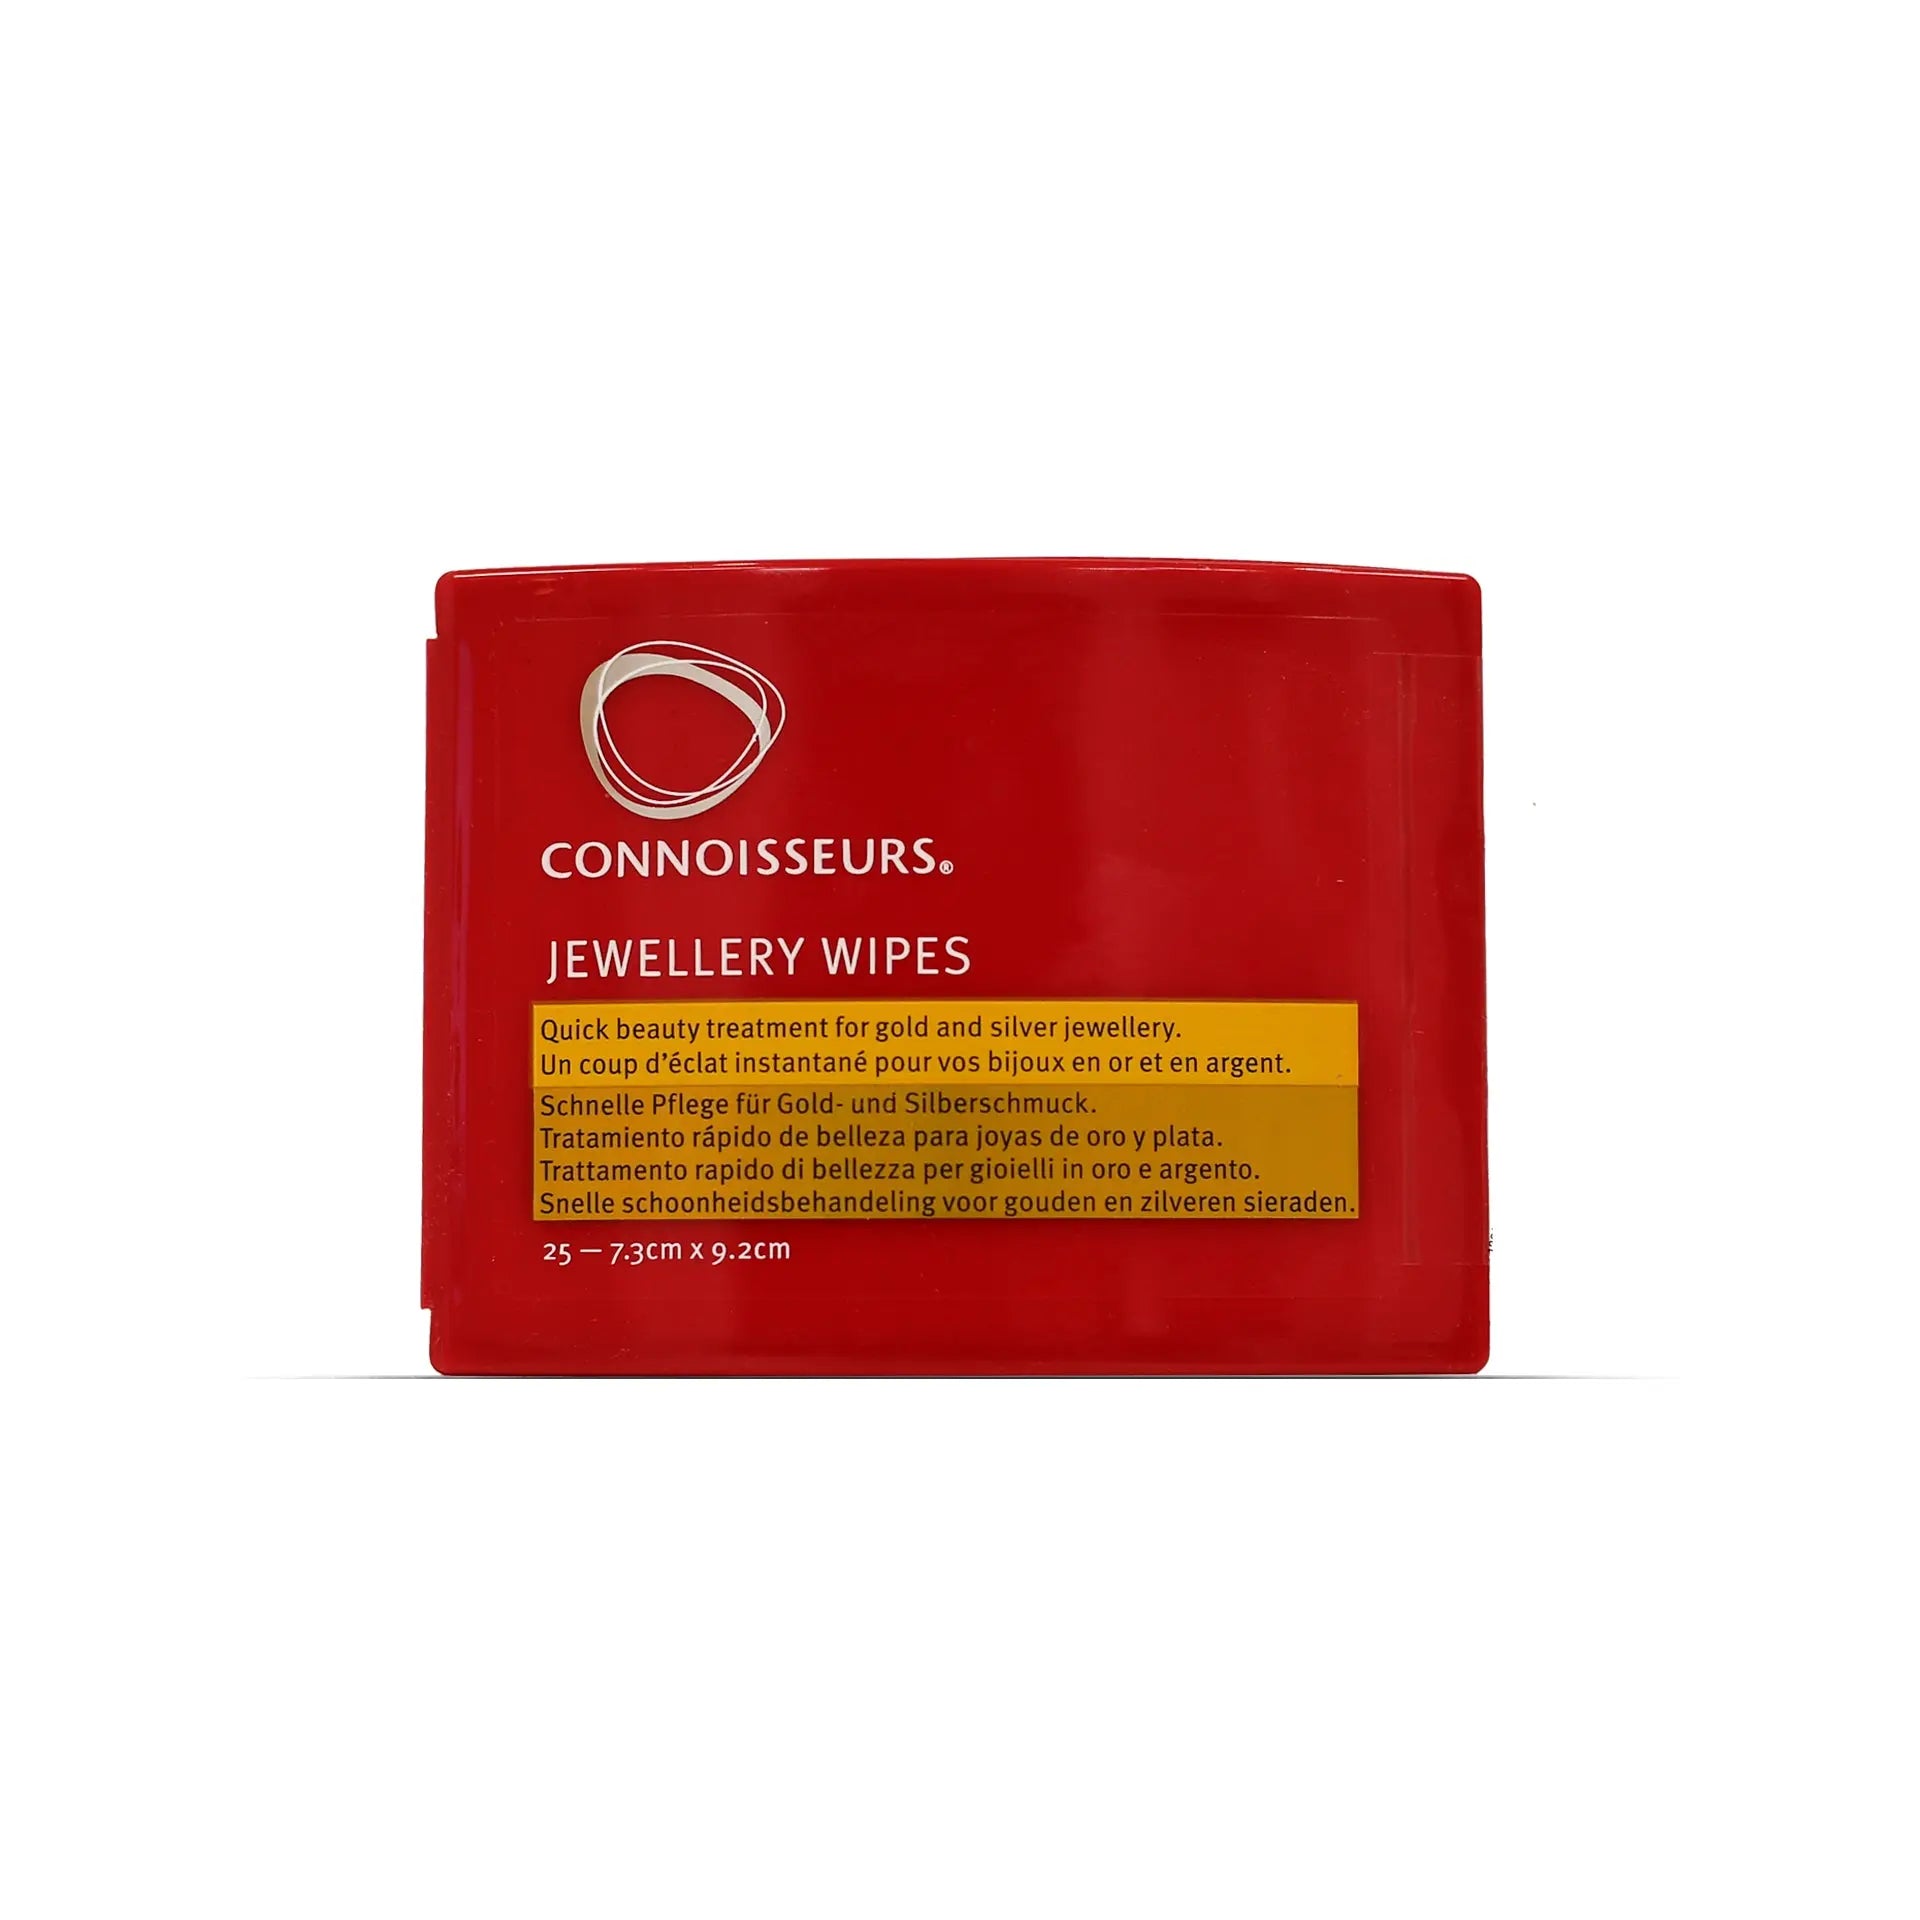 Connoisseurs Jewelry Wipes fra Connoisseurs